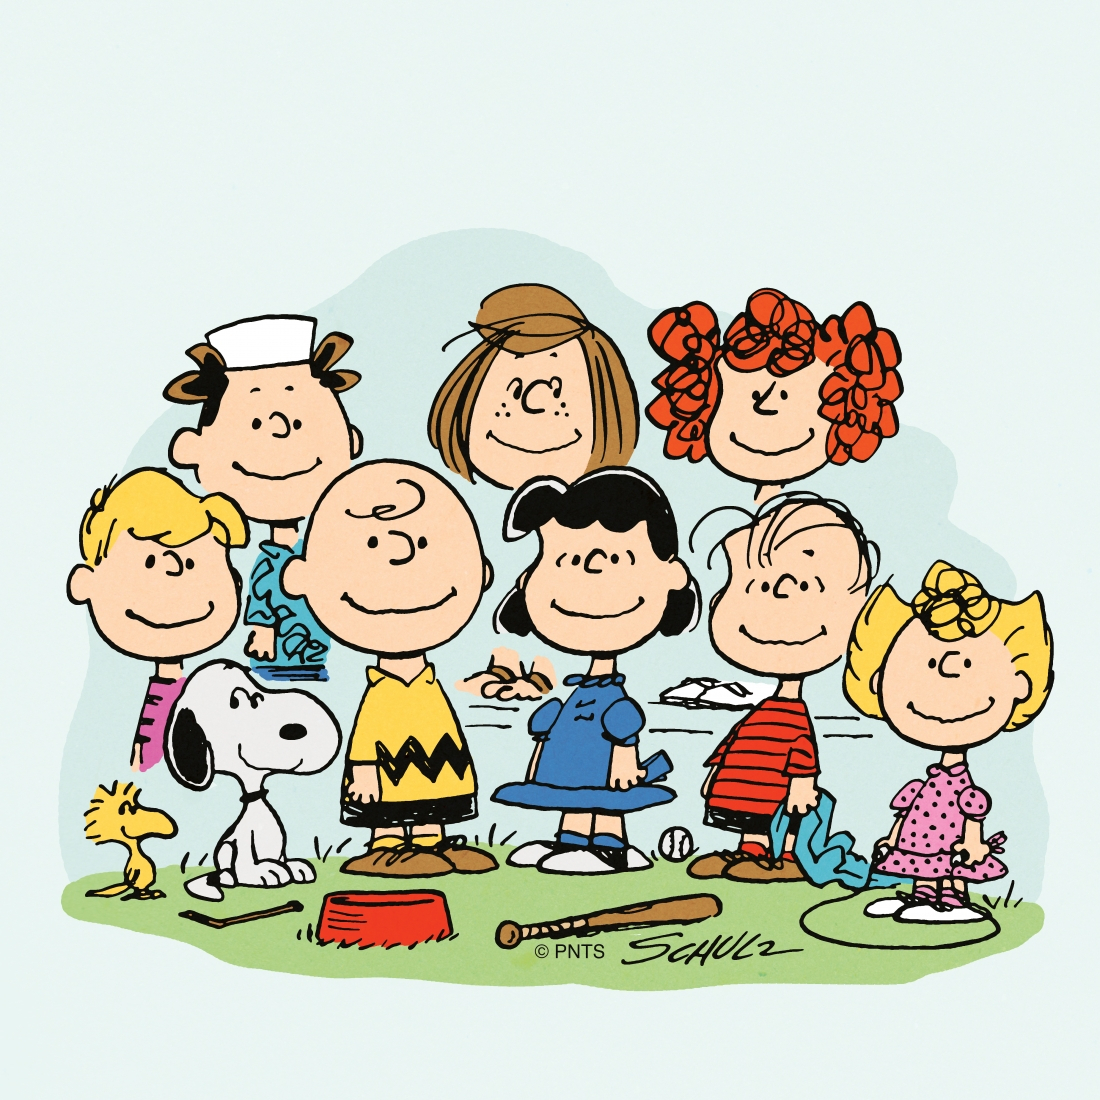 10 Top Charlie Brown Pictures FULL HD 1920×1080 For PC Background